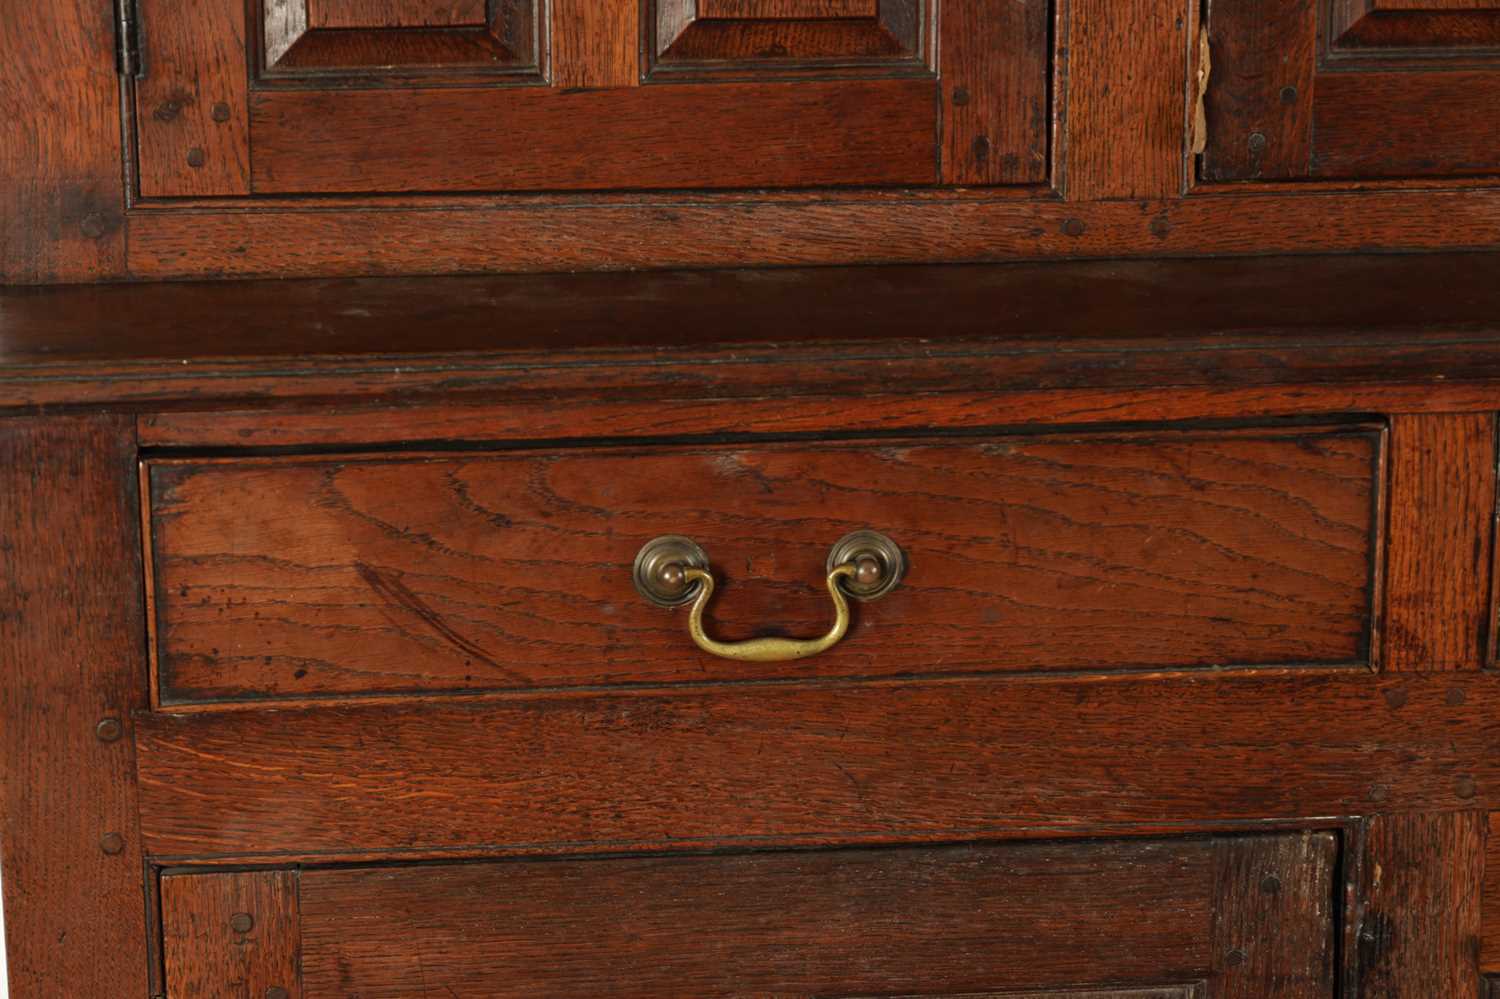 AN EARLY 18TH CENTURY PANELLED OAK DUDARN - Image 2 of 8